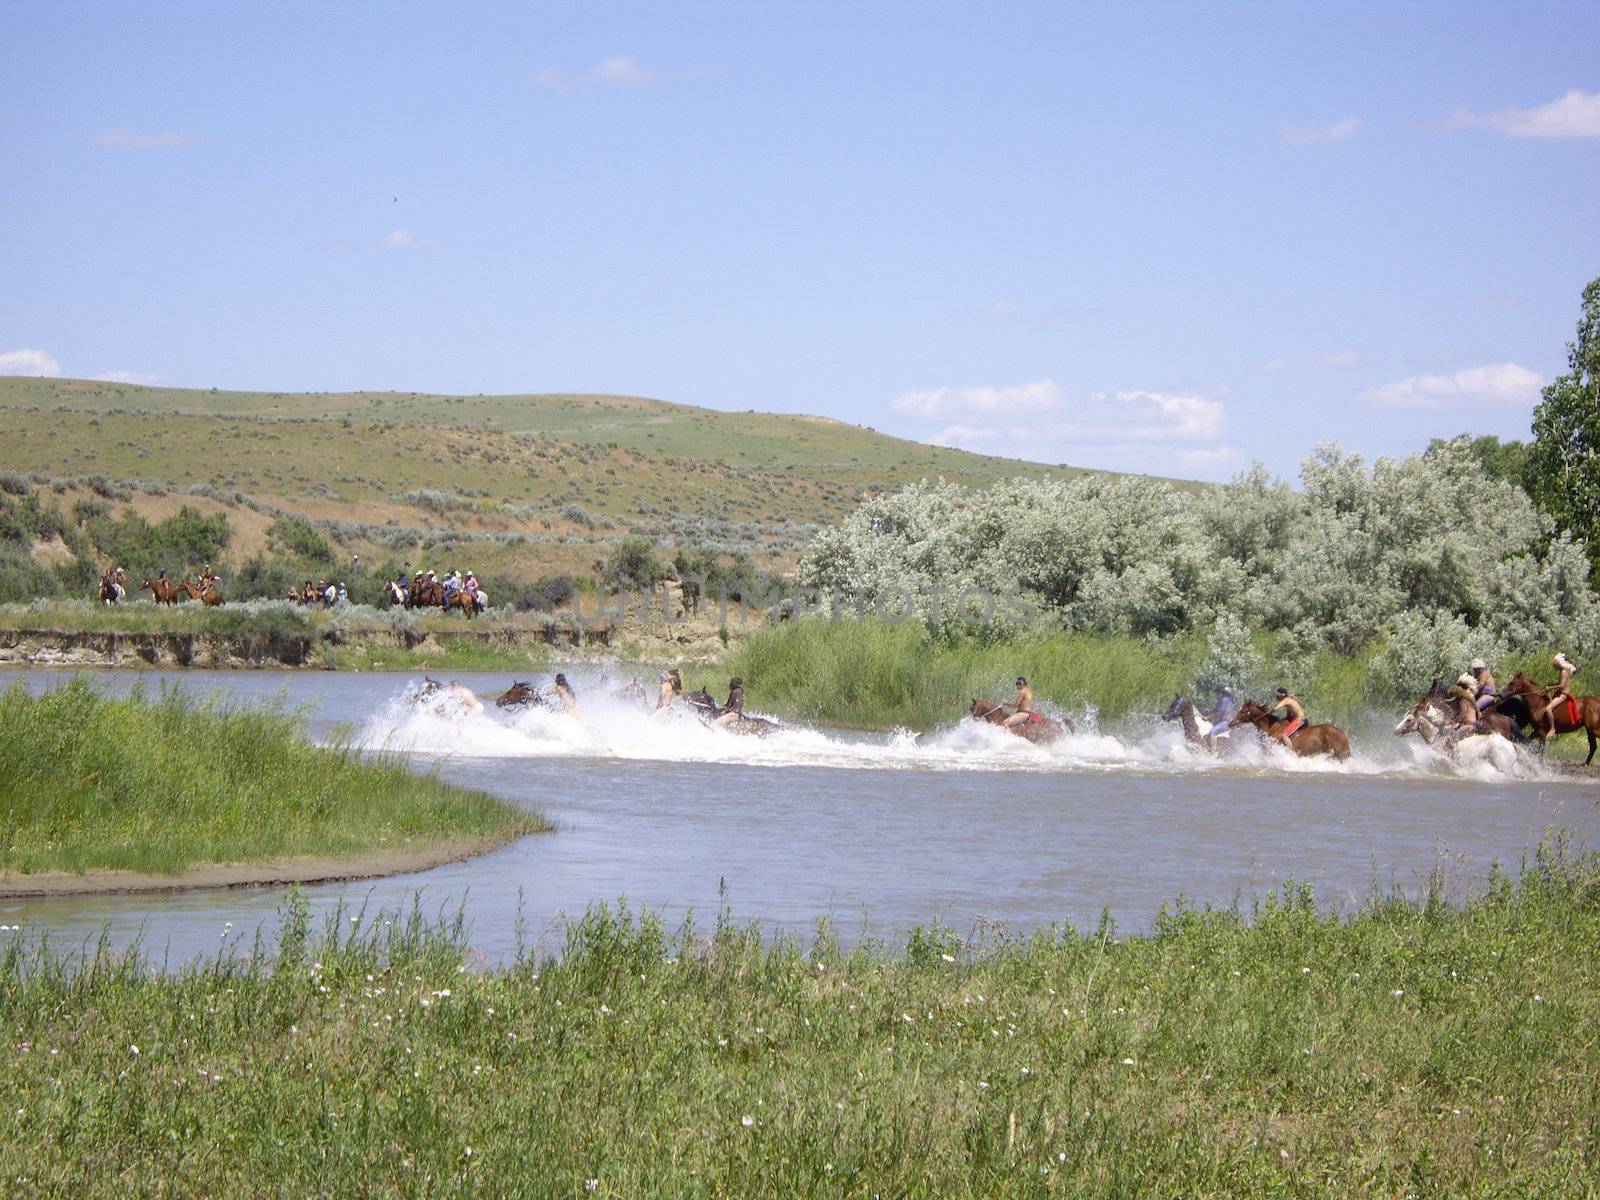 Bareback Indians chase US Cavalry at Battle of Bighorn reenactment